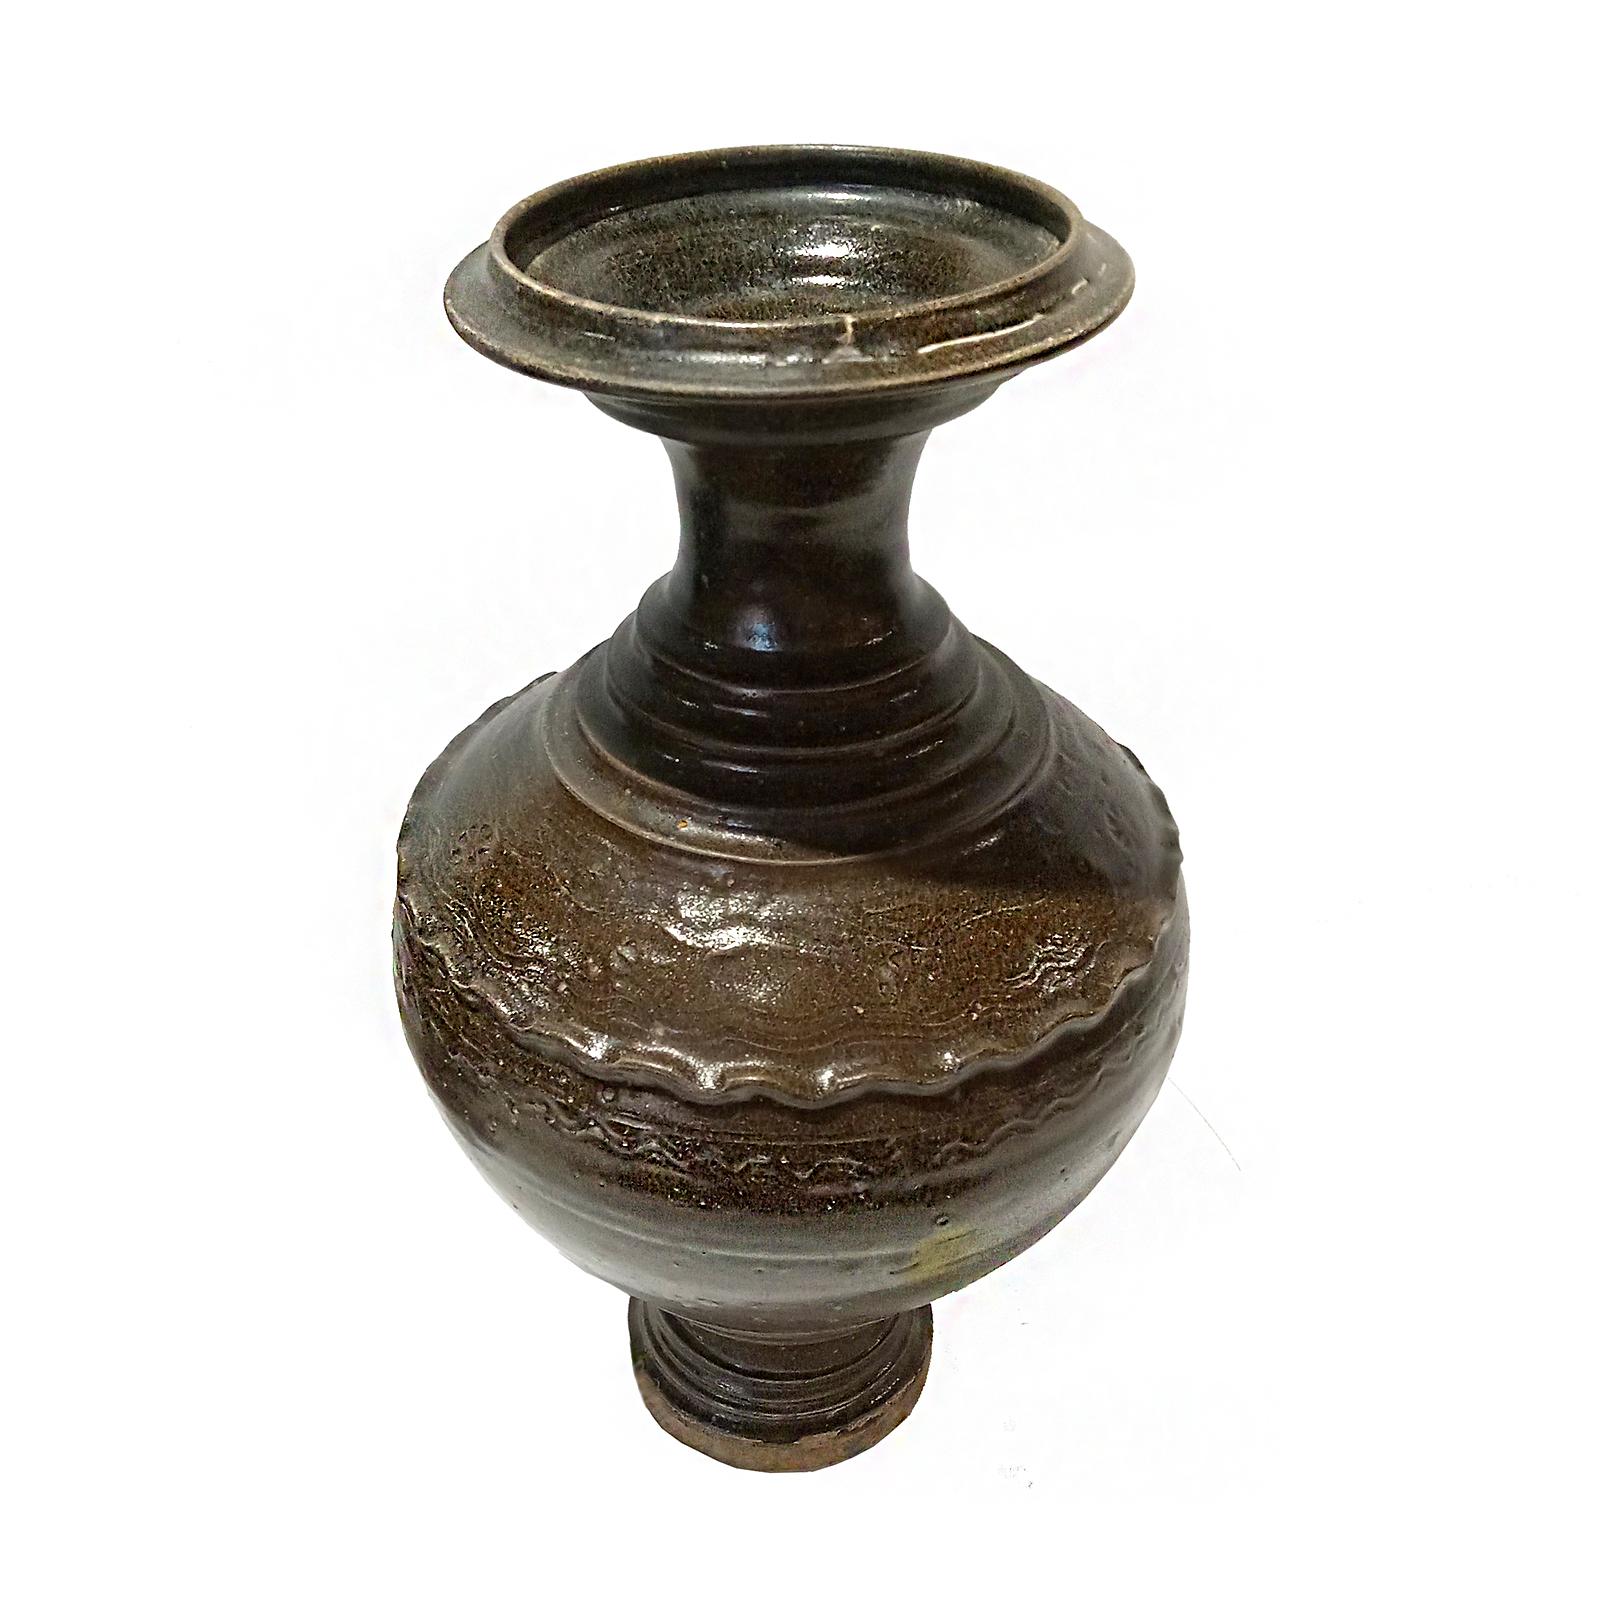 A Thai ceramic vase, glazed in black, early 20th Century. Natural clay / earthenware, same material originally used in ancient kilns of Sawankhalok, one of the two main centers of old Thai ceramics. 

Narrow neck with a wide top, curved round body